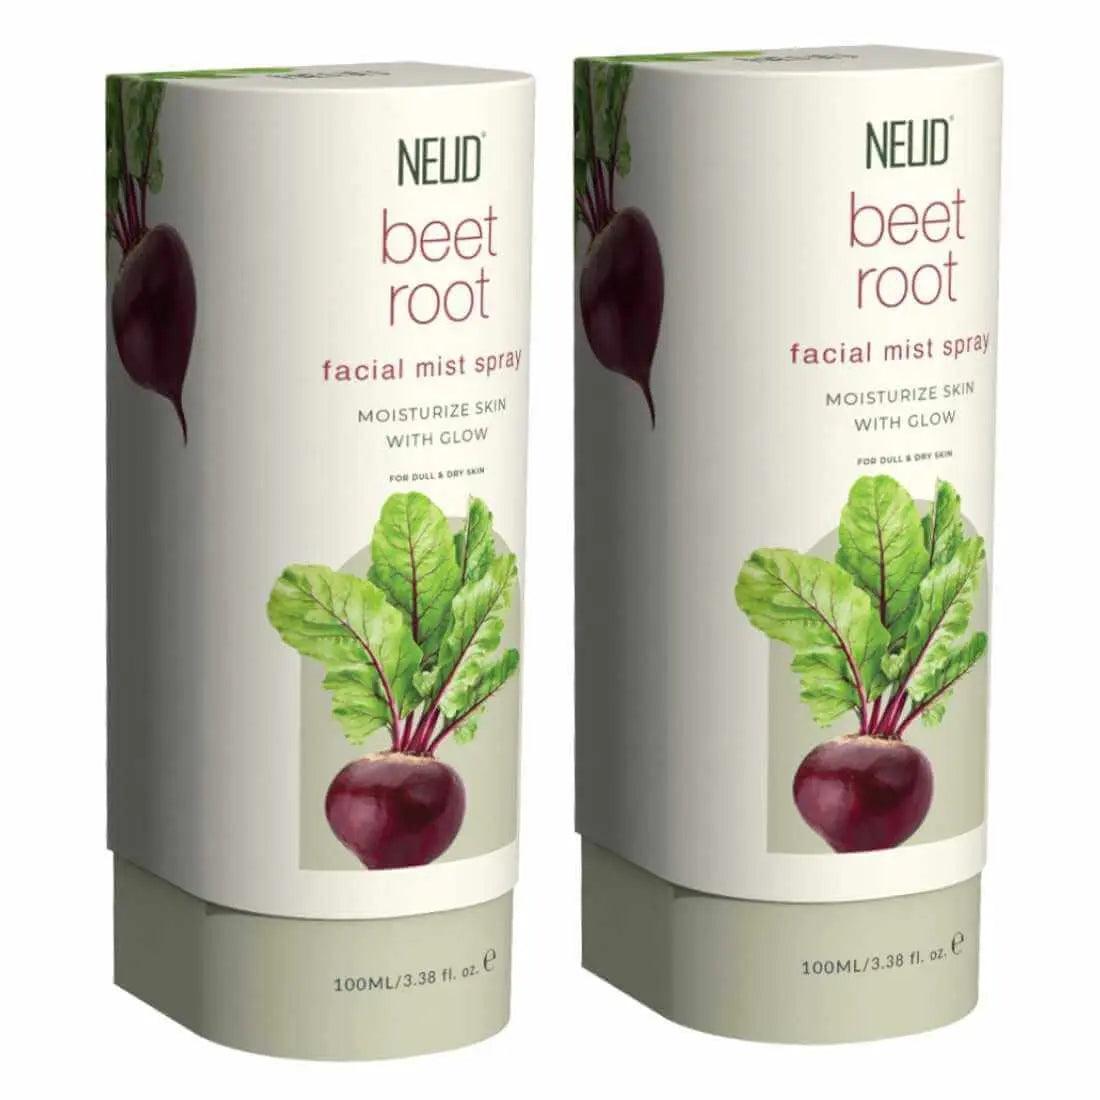 NEUD Beet Root Facial Mist Spray For Dull and Dry Skin - 100 ml 9559682313270